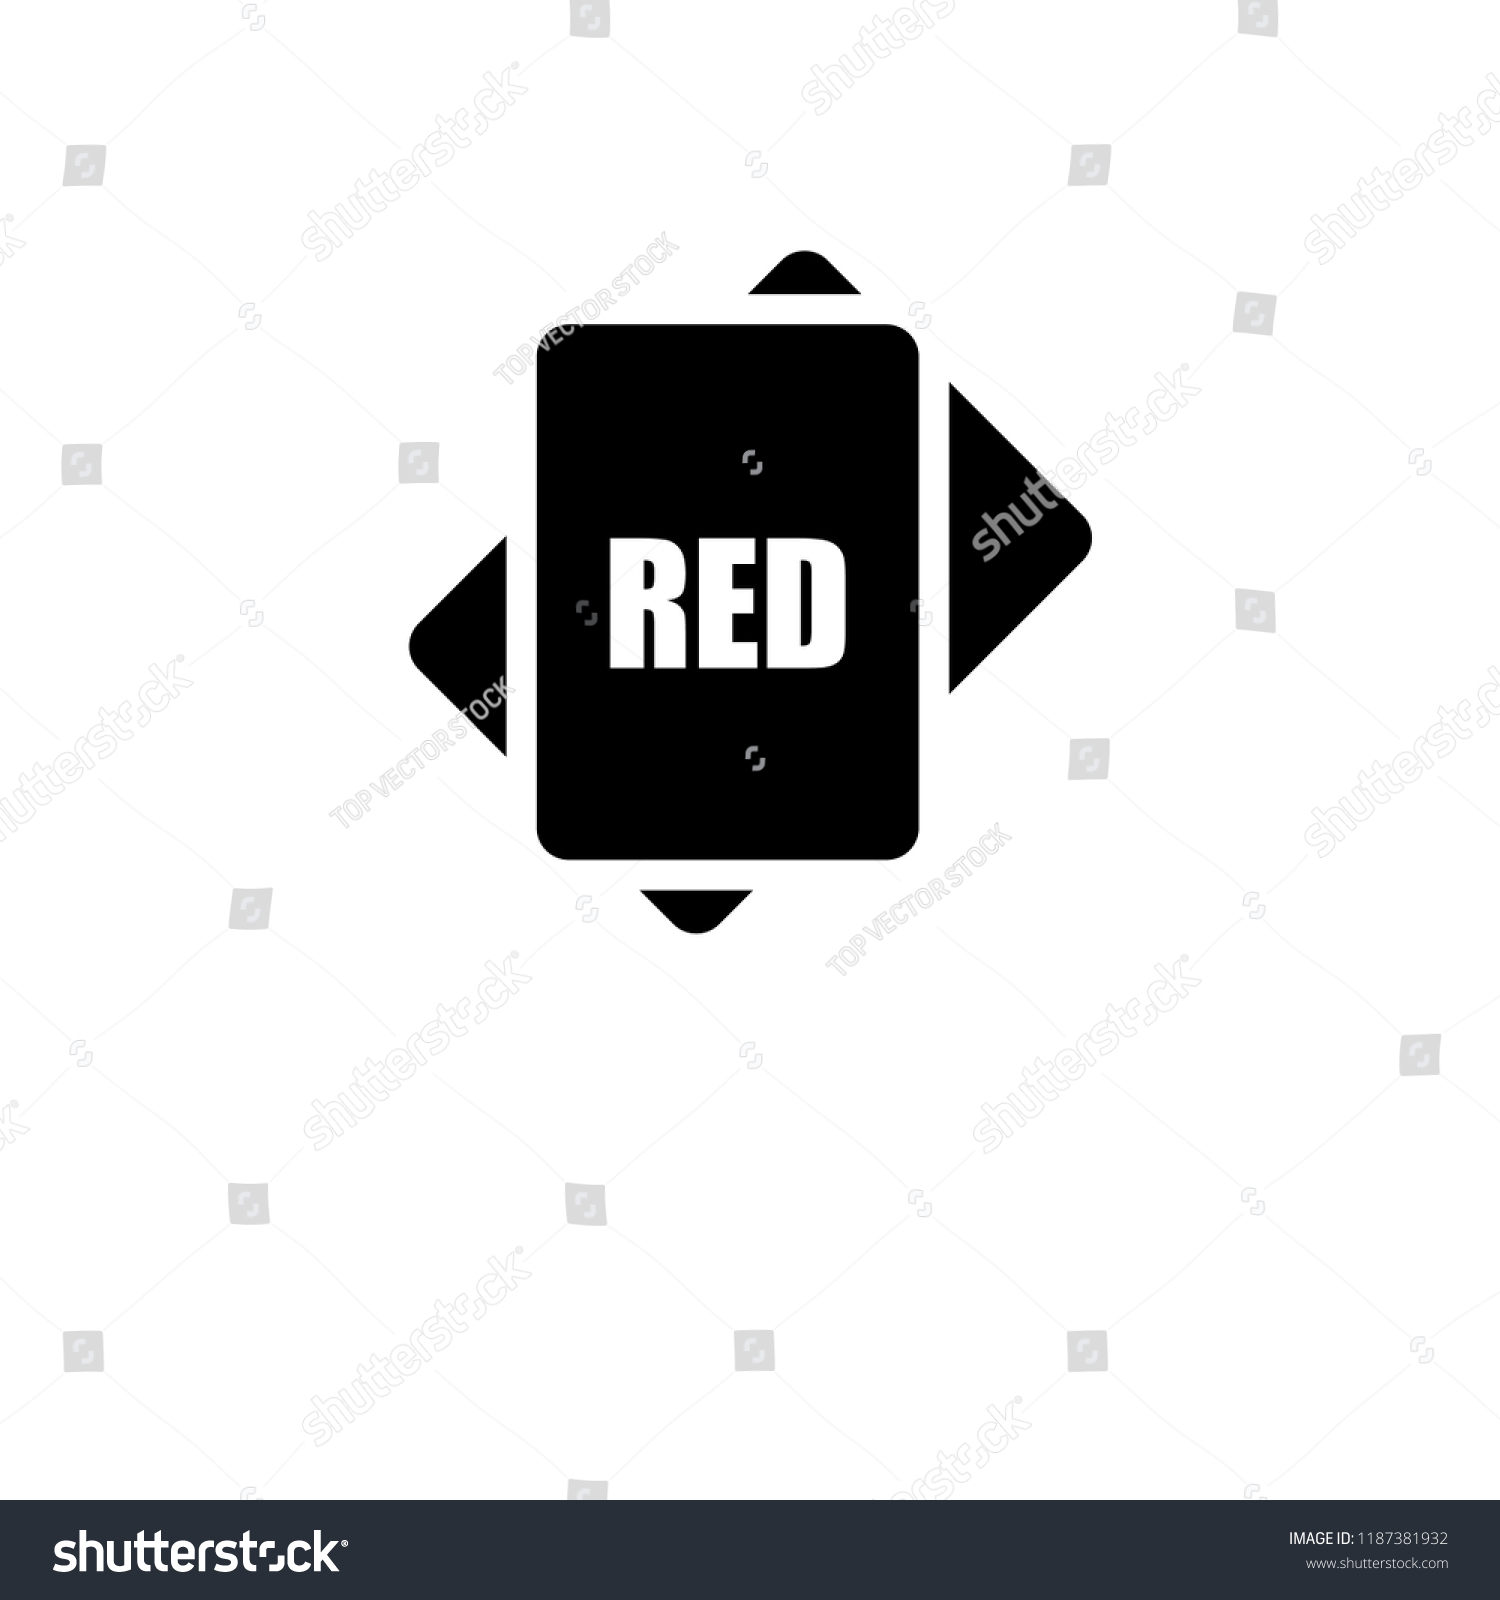 SVG of Red icon vector isolated on white background, logo concept of Red sign on transparent background, filled black symbol svg